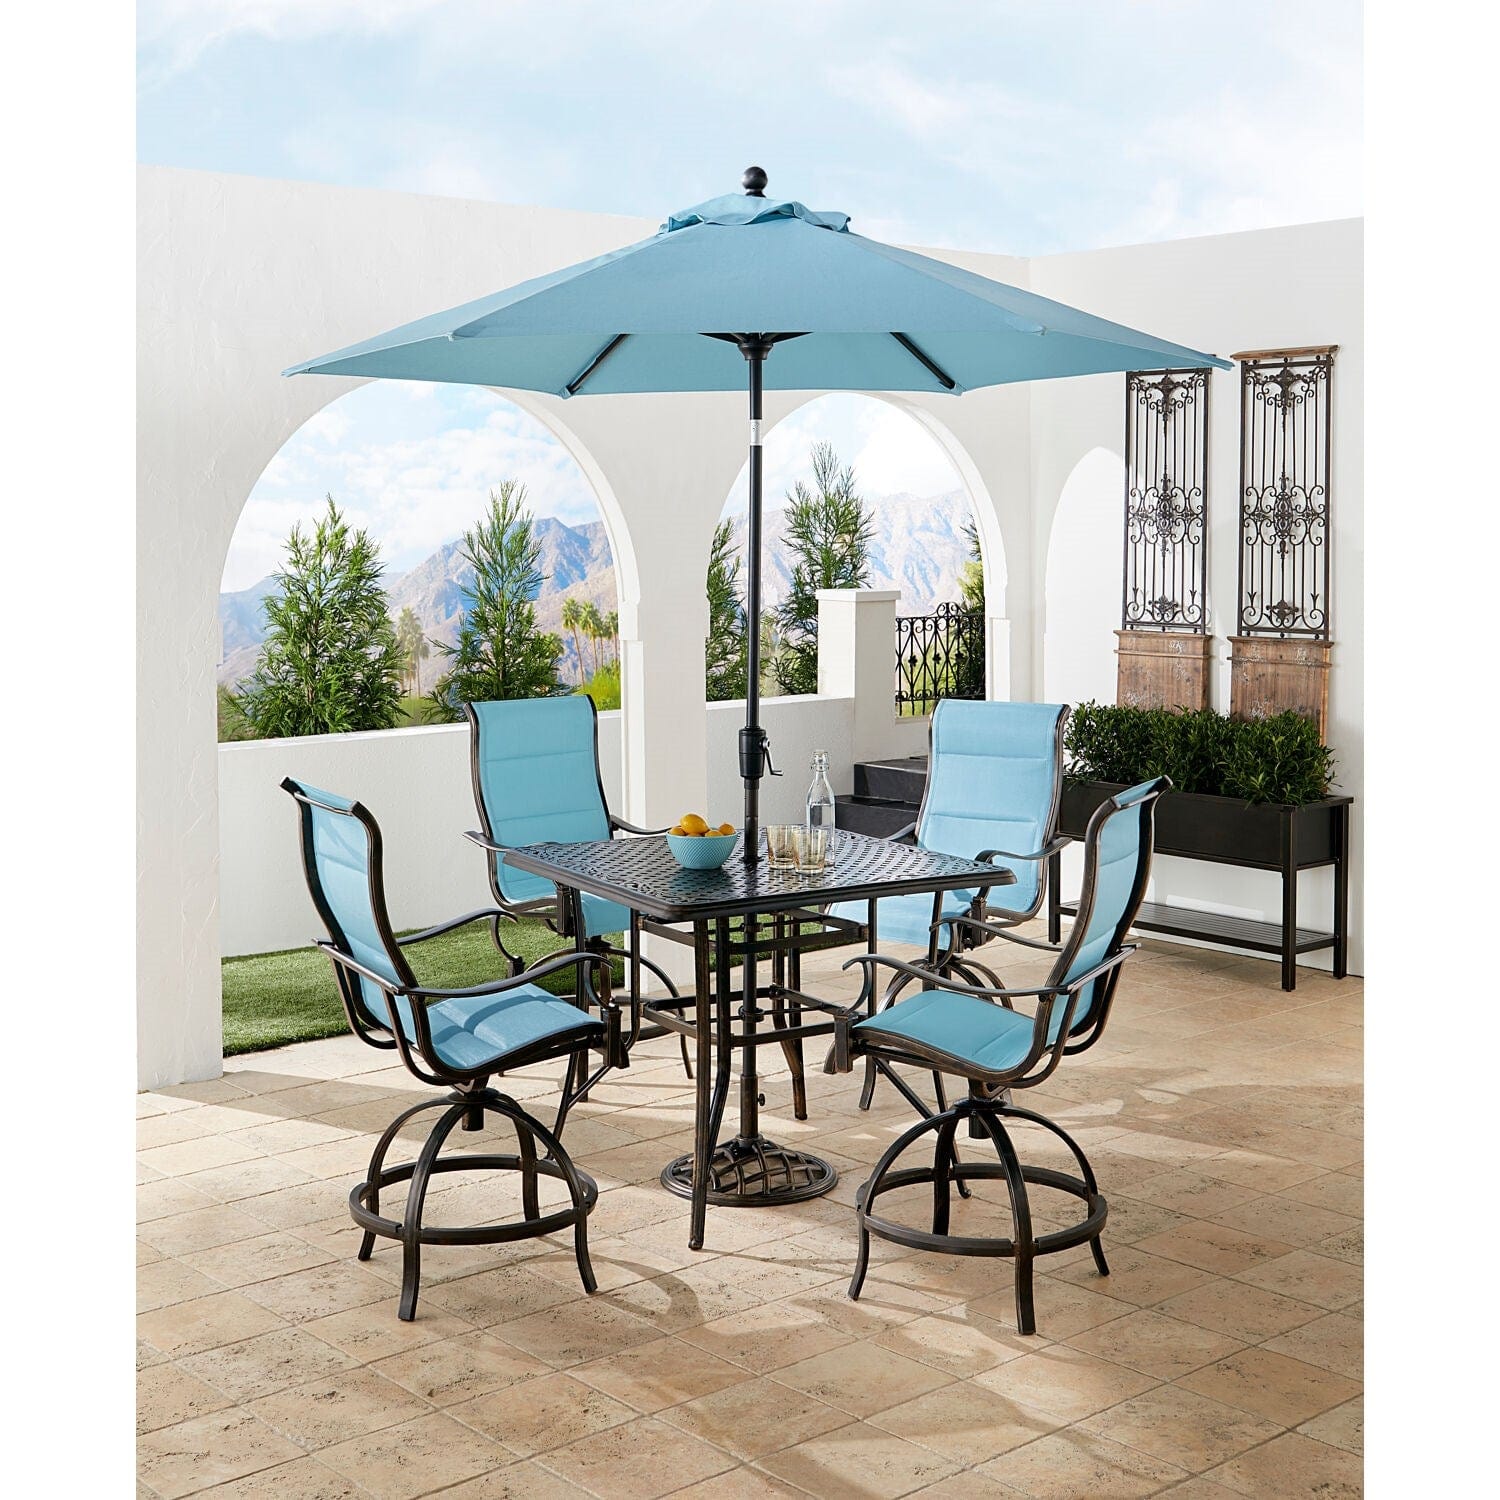 Hanover Outdoor Dining Set Hanover Traditions 5-Piece High-Dining Set in Blue with 4 Swivel Counter-Height Chairs, 42-in. Table, and 9-ft Umbrella